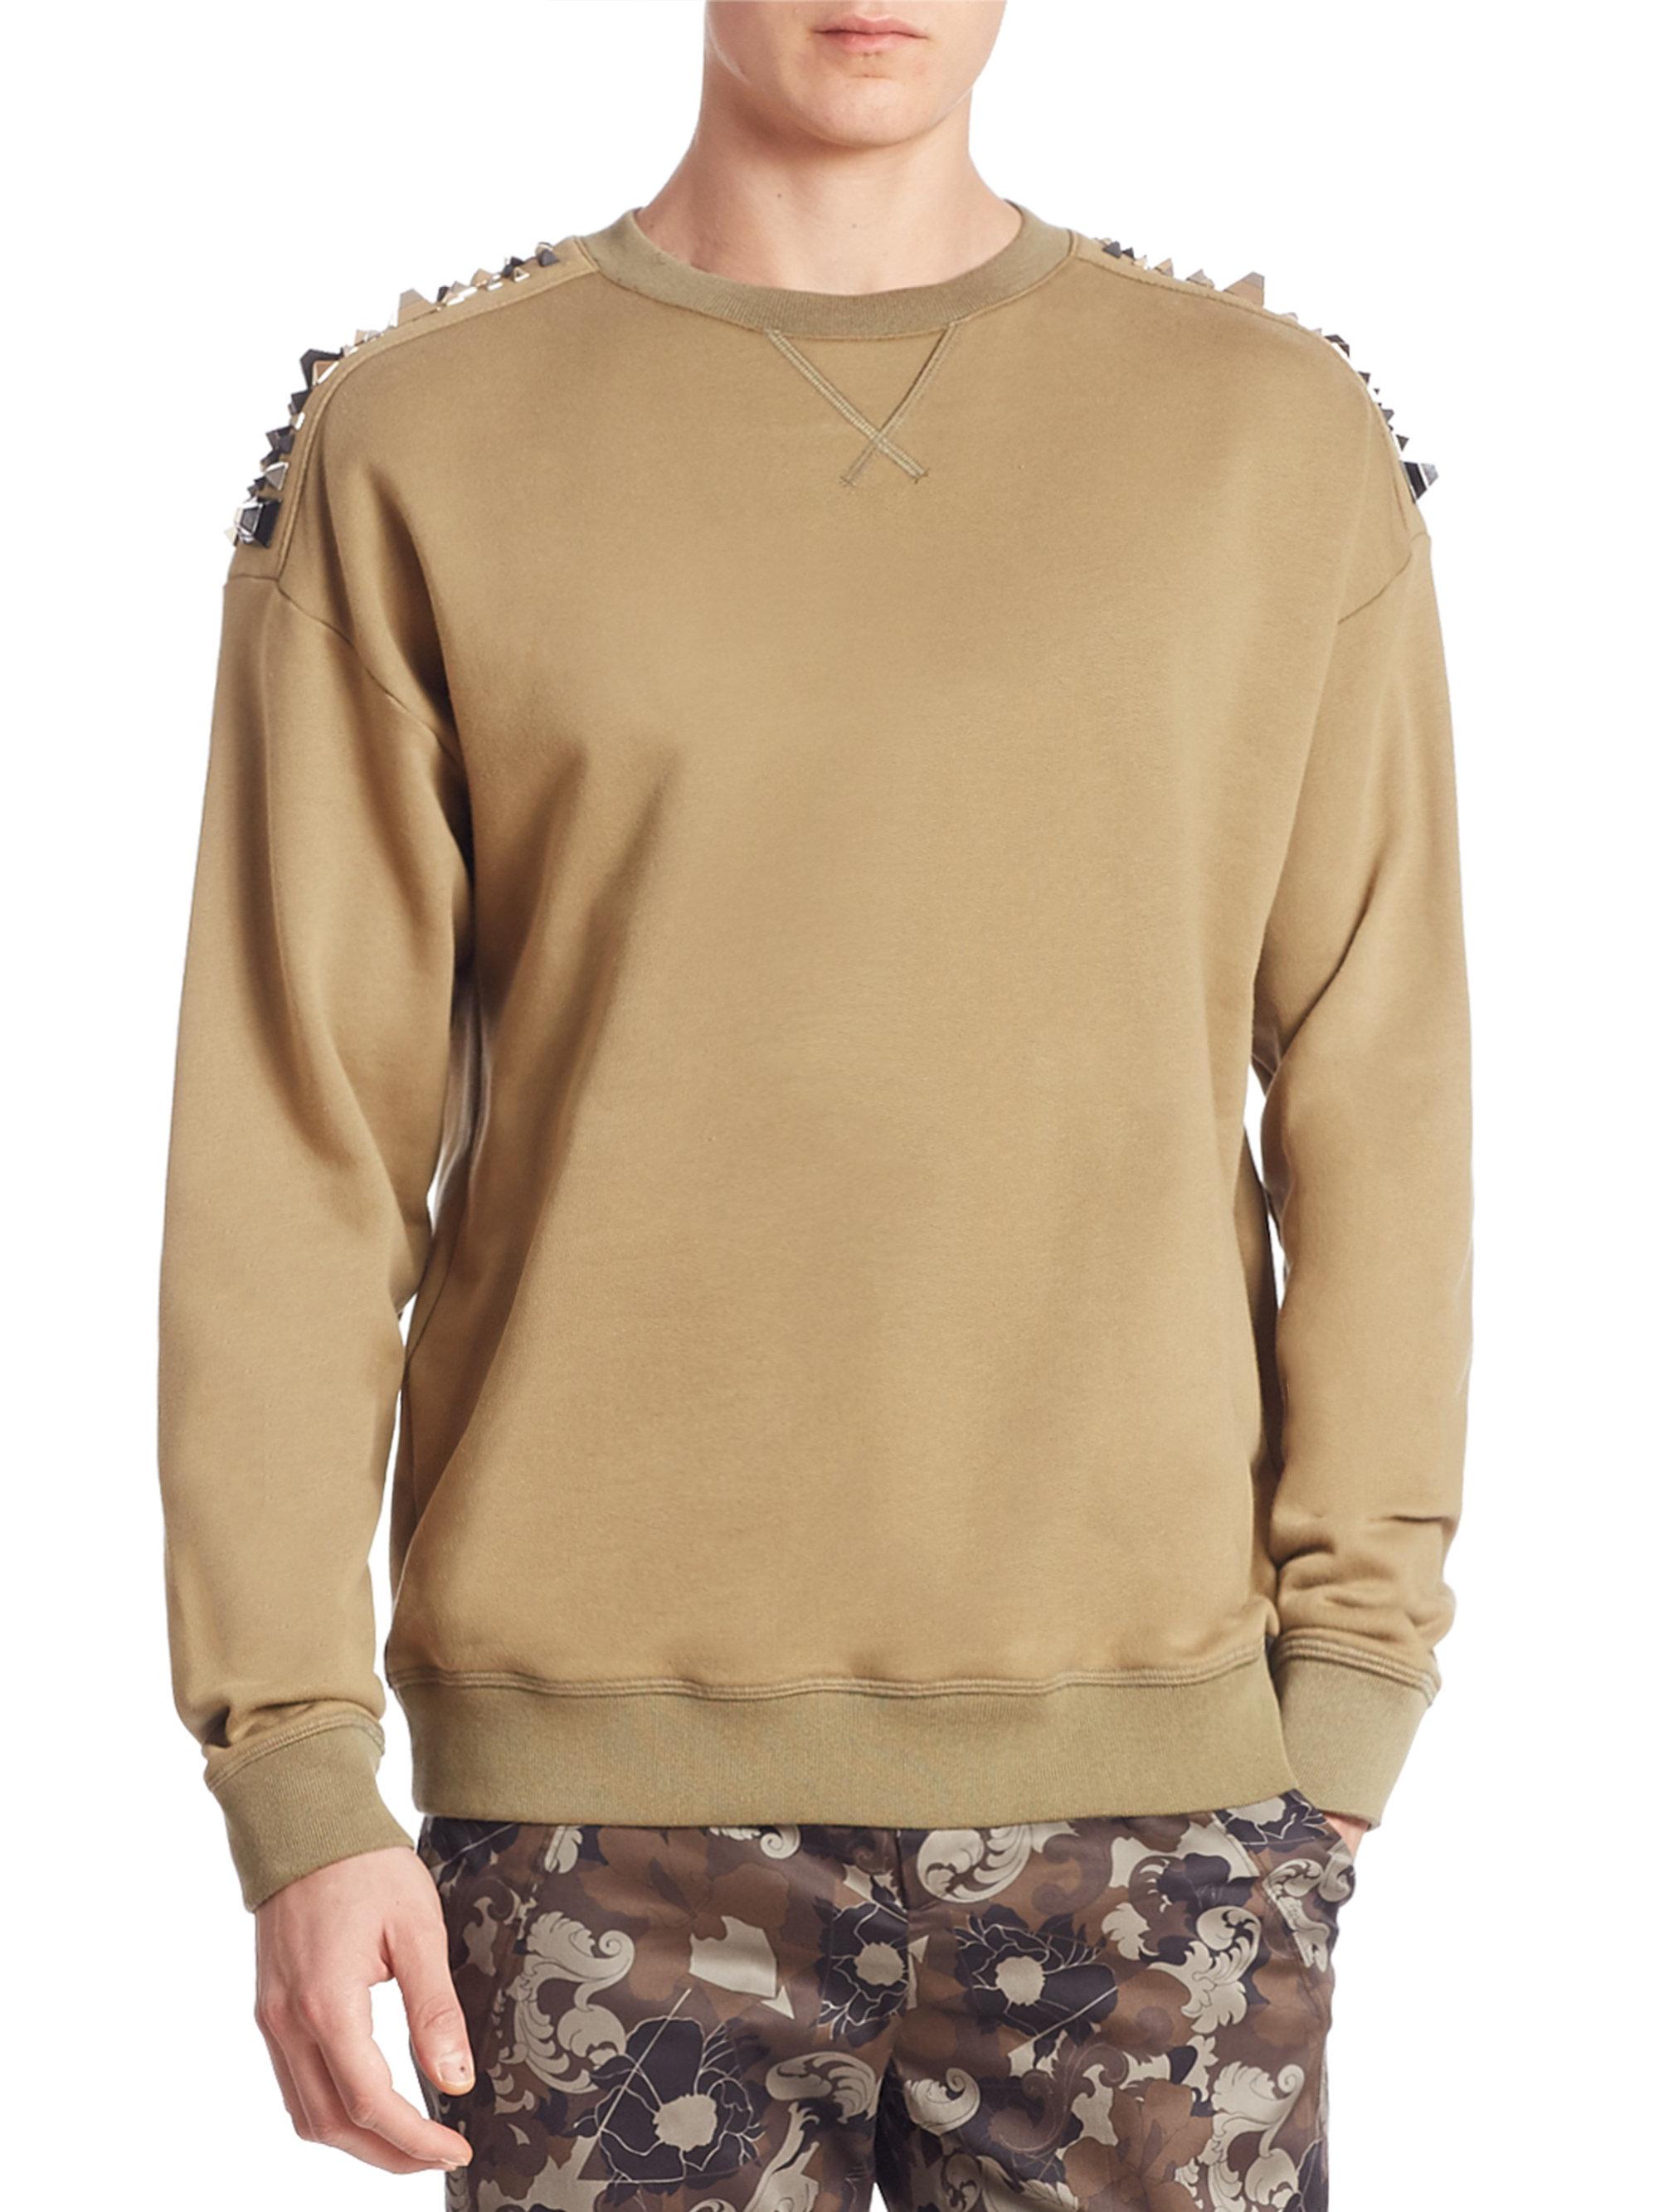 Lyst - Versace Studded Cotton Sweater in Natural for Men